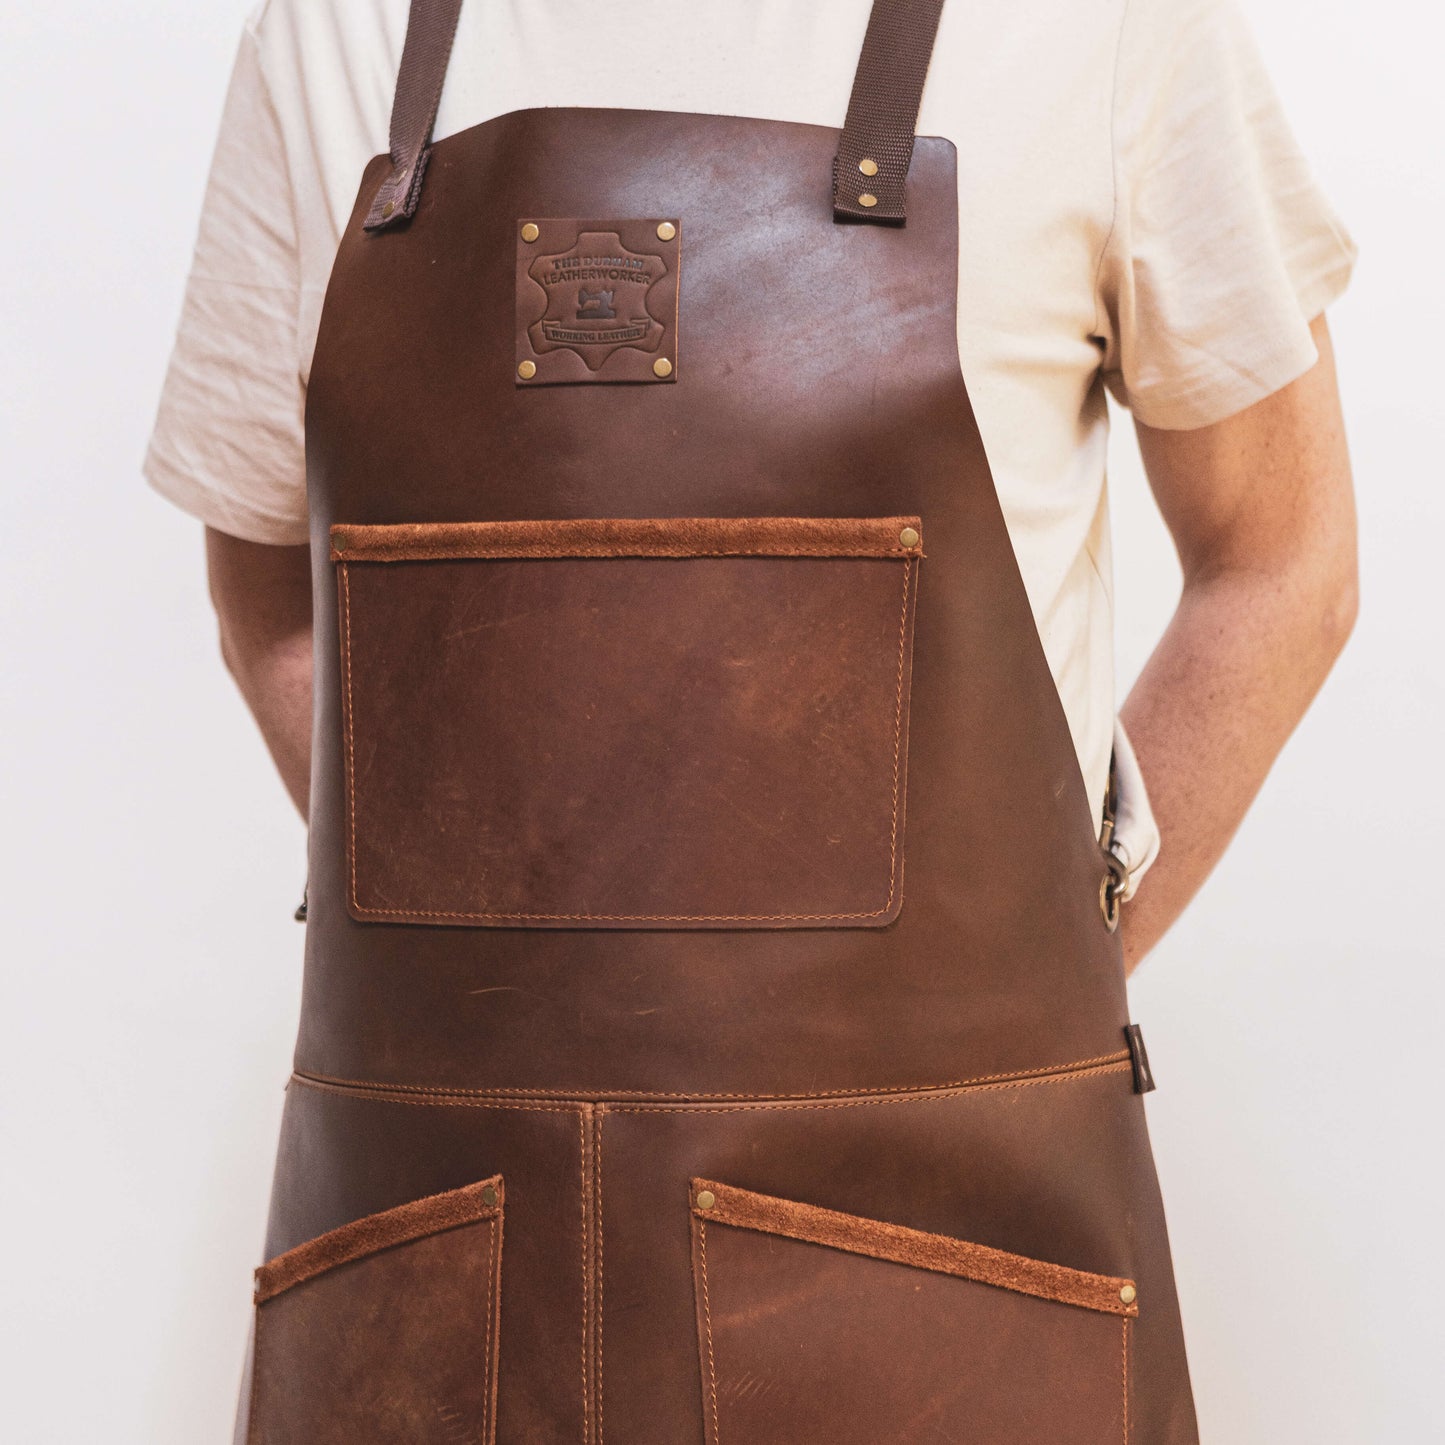 A tradesman wearing a white shirt and a dark brown leather apron from The Durham Leatherworker, with pockets and a logo patch, standing against a plain background. Only the torso is visible.